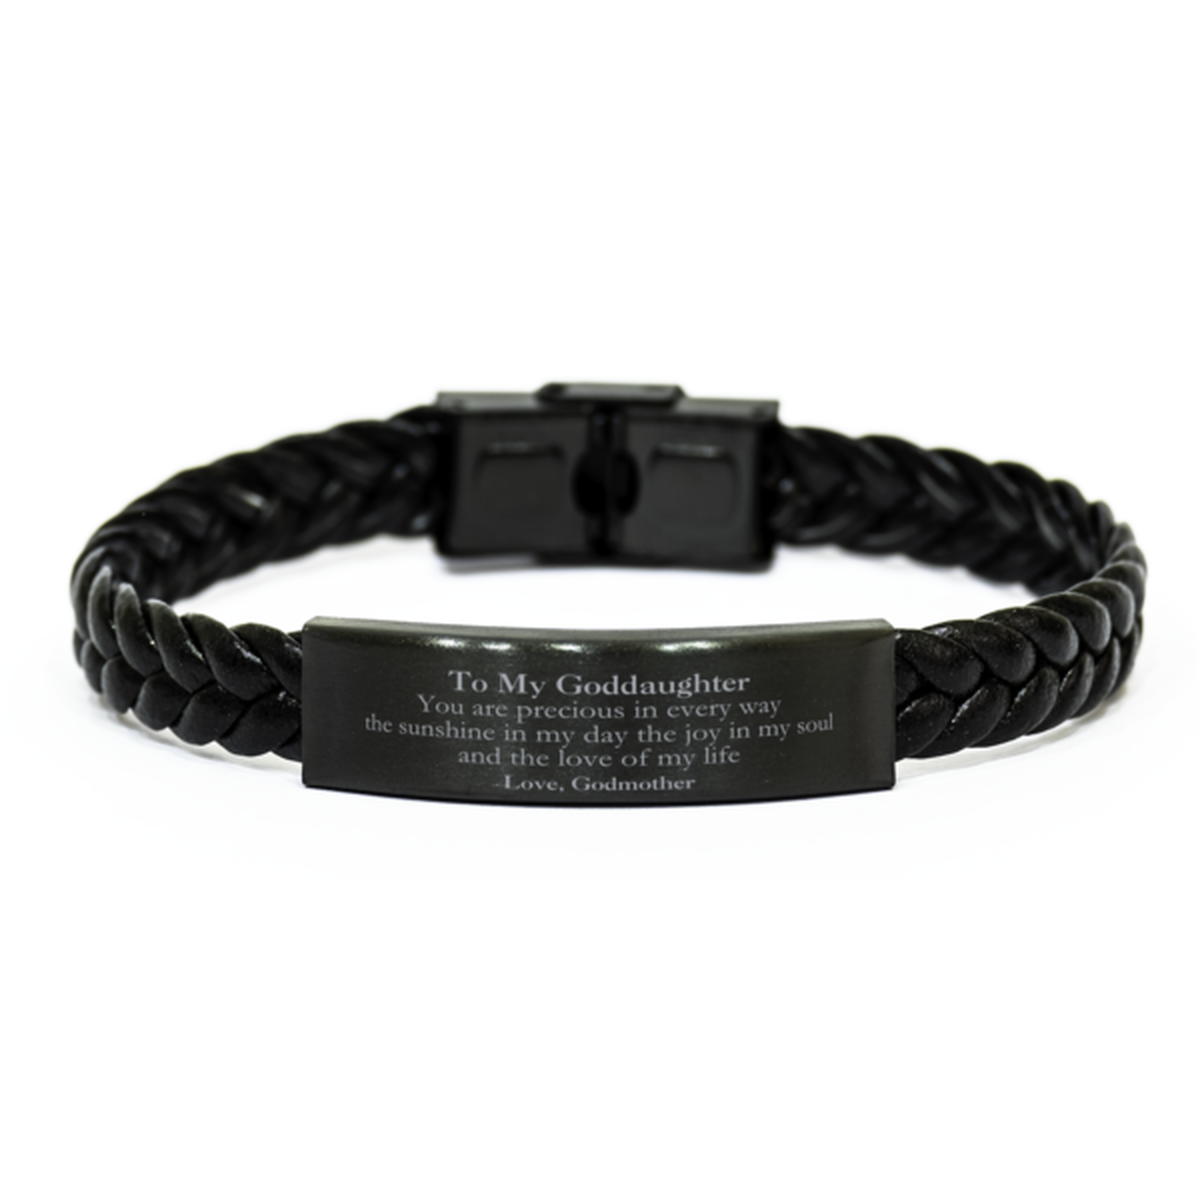 Graduation Gifts for Goddaughter Braided Leather Bracelet Present from Godmother, Christmas Goddaughter Birthday Gifts Goddaughter You are precious in every way the sunshine in my day. Love, Godmother